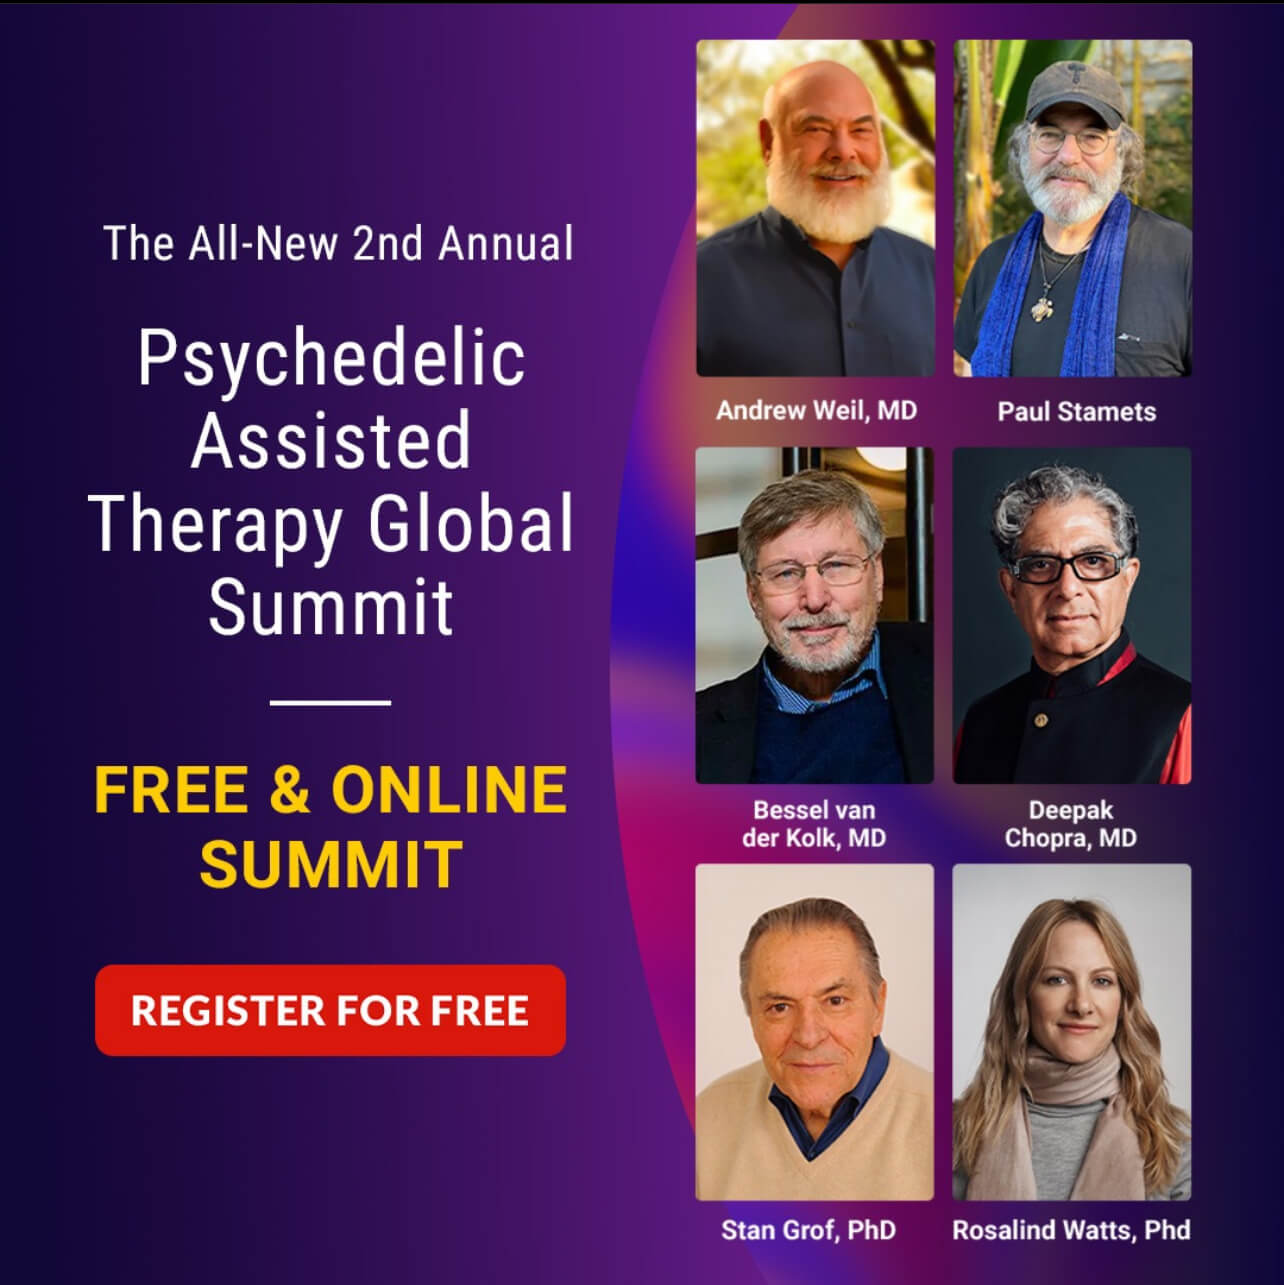 Psychedelic-Assisted Therapy Global Summit